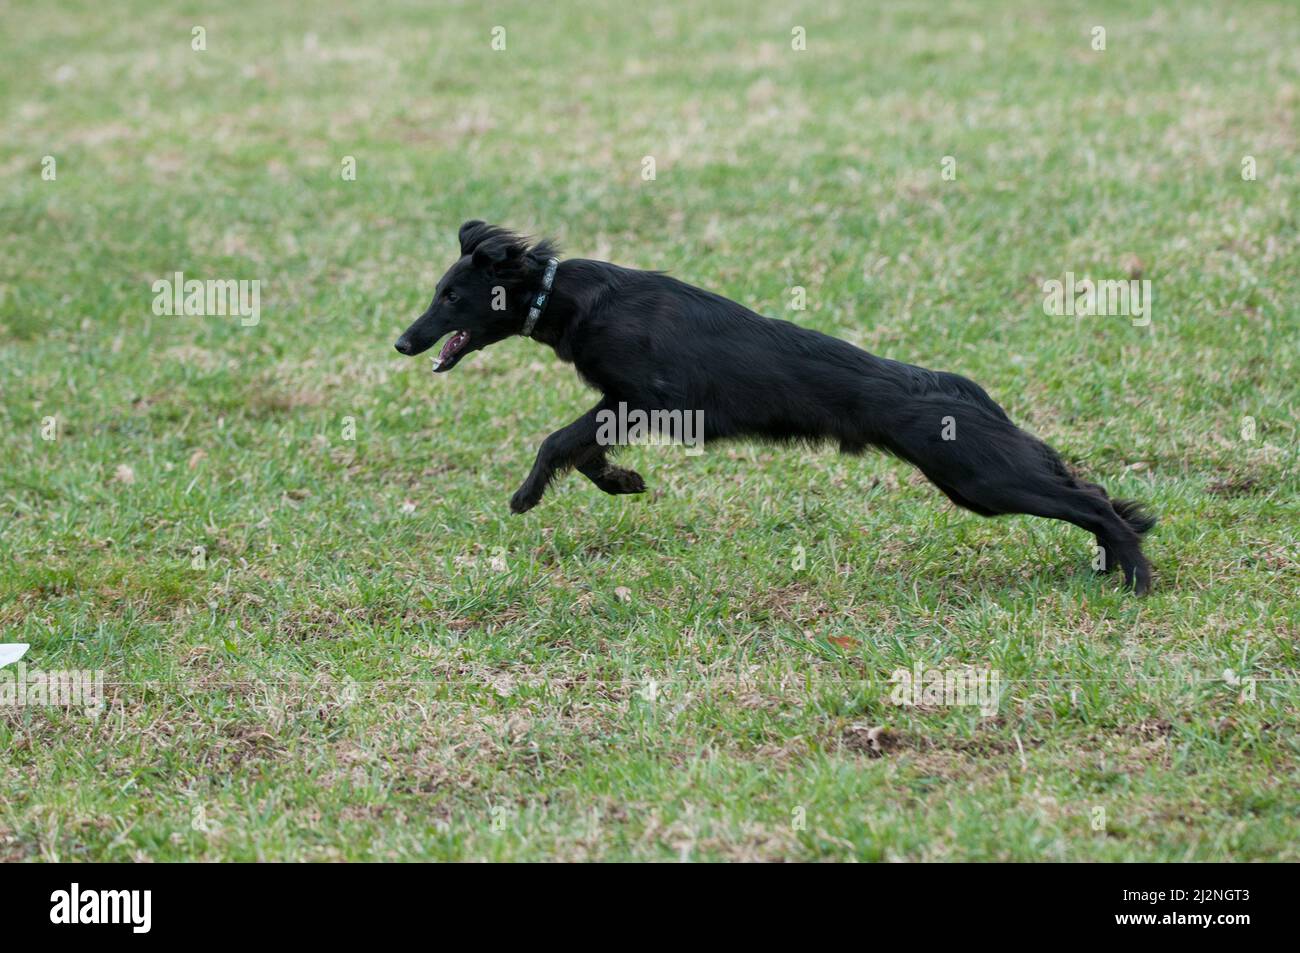 Black dog on the run during lure coursing Stock Photo